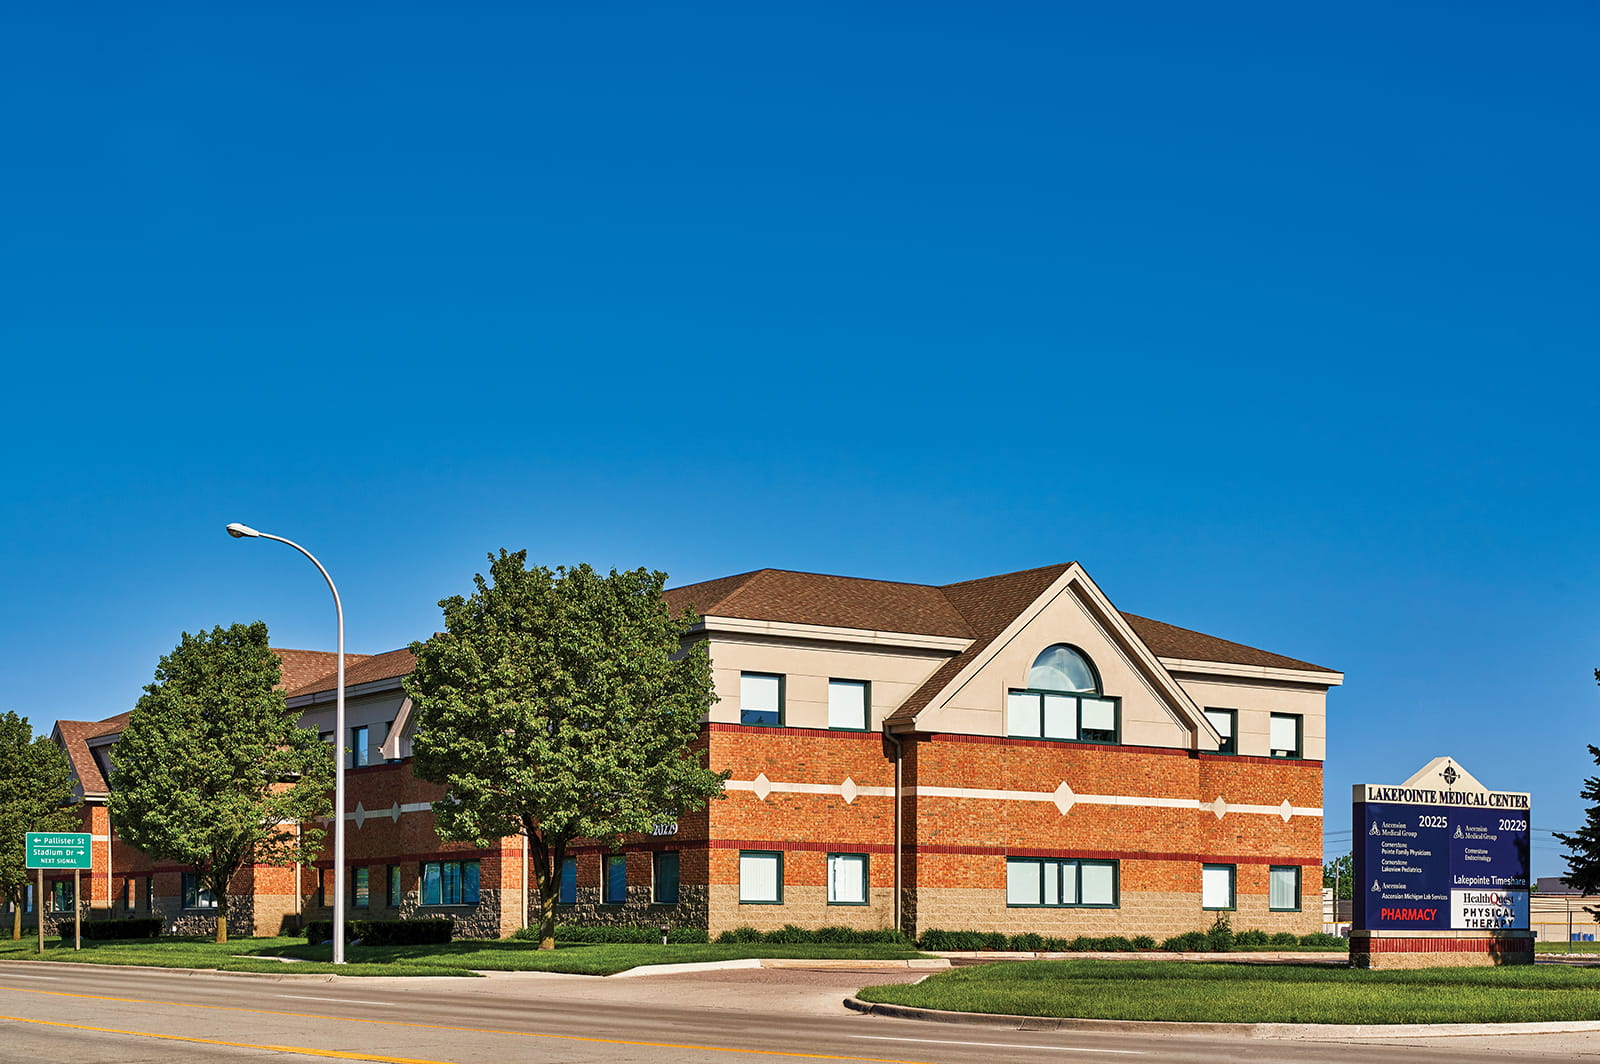 Ascension Michigan Lab Services at 9 Mile